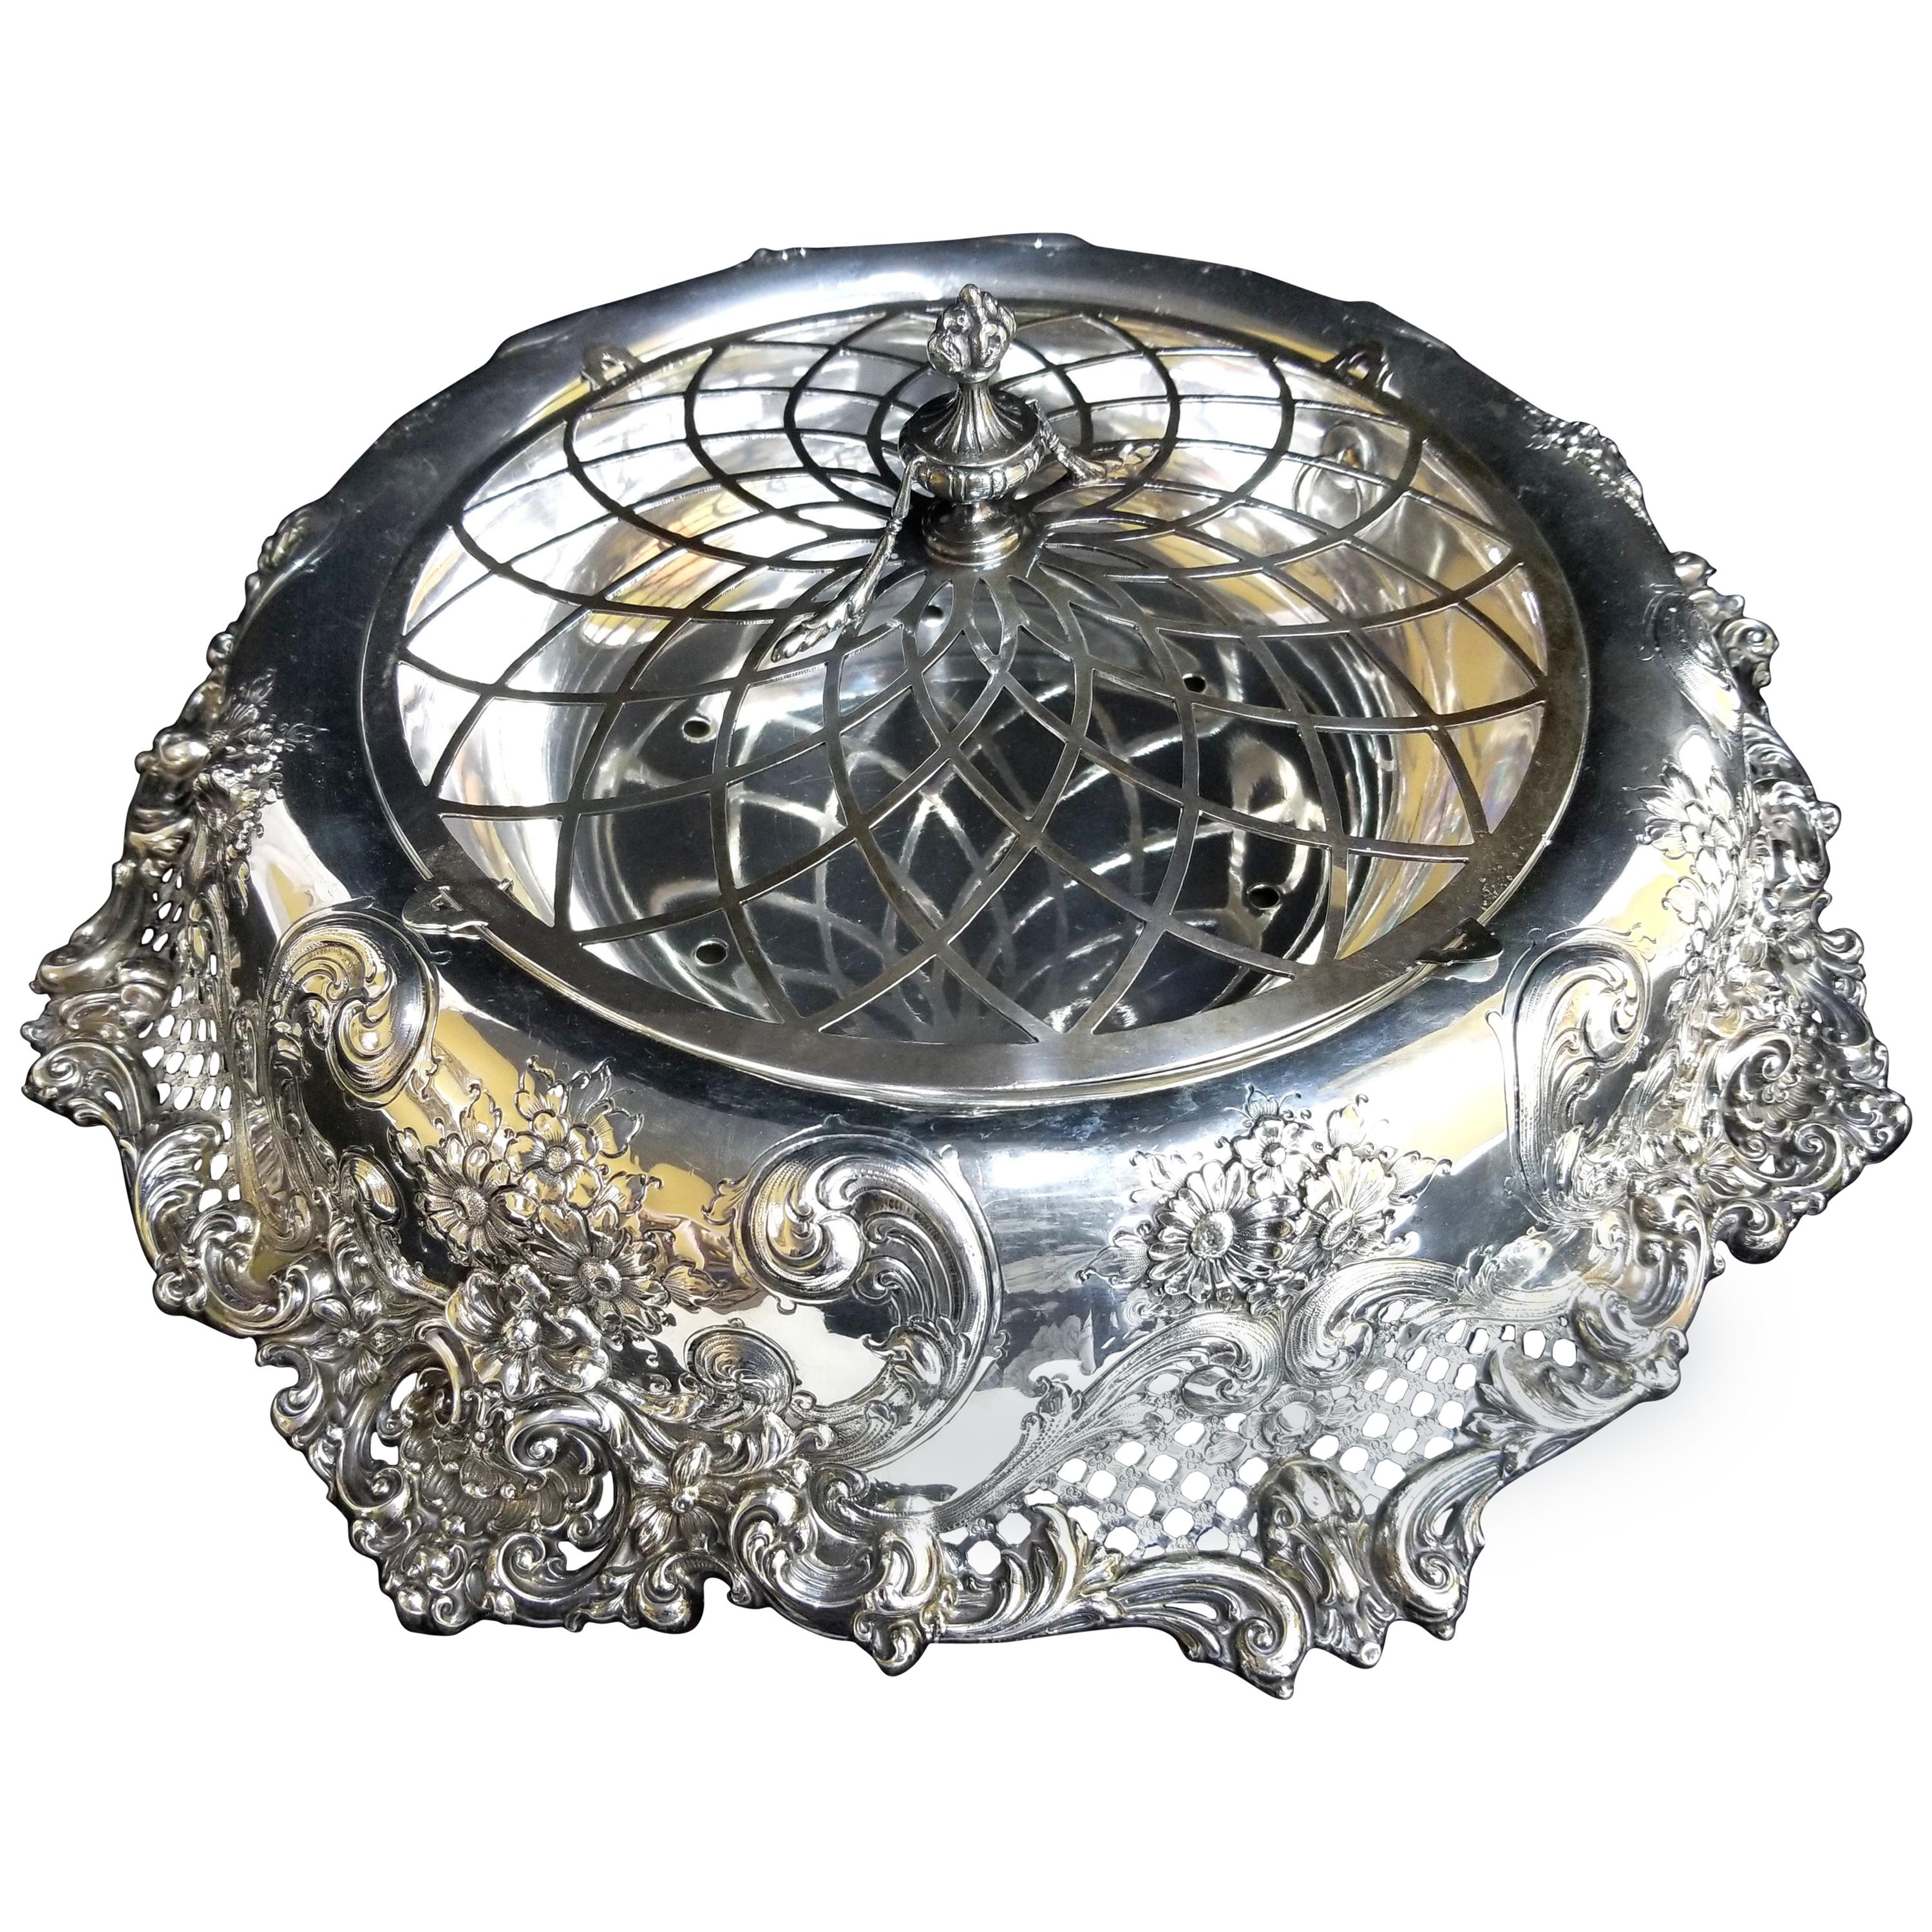 Redlich Antique Sterling Silver Art Nouveau Centrepiece Bowl with Liner and Lid For Sale